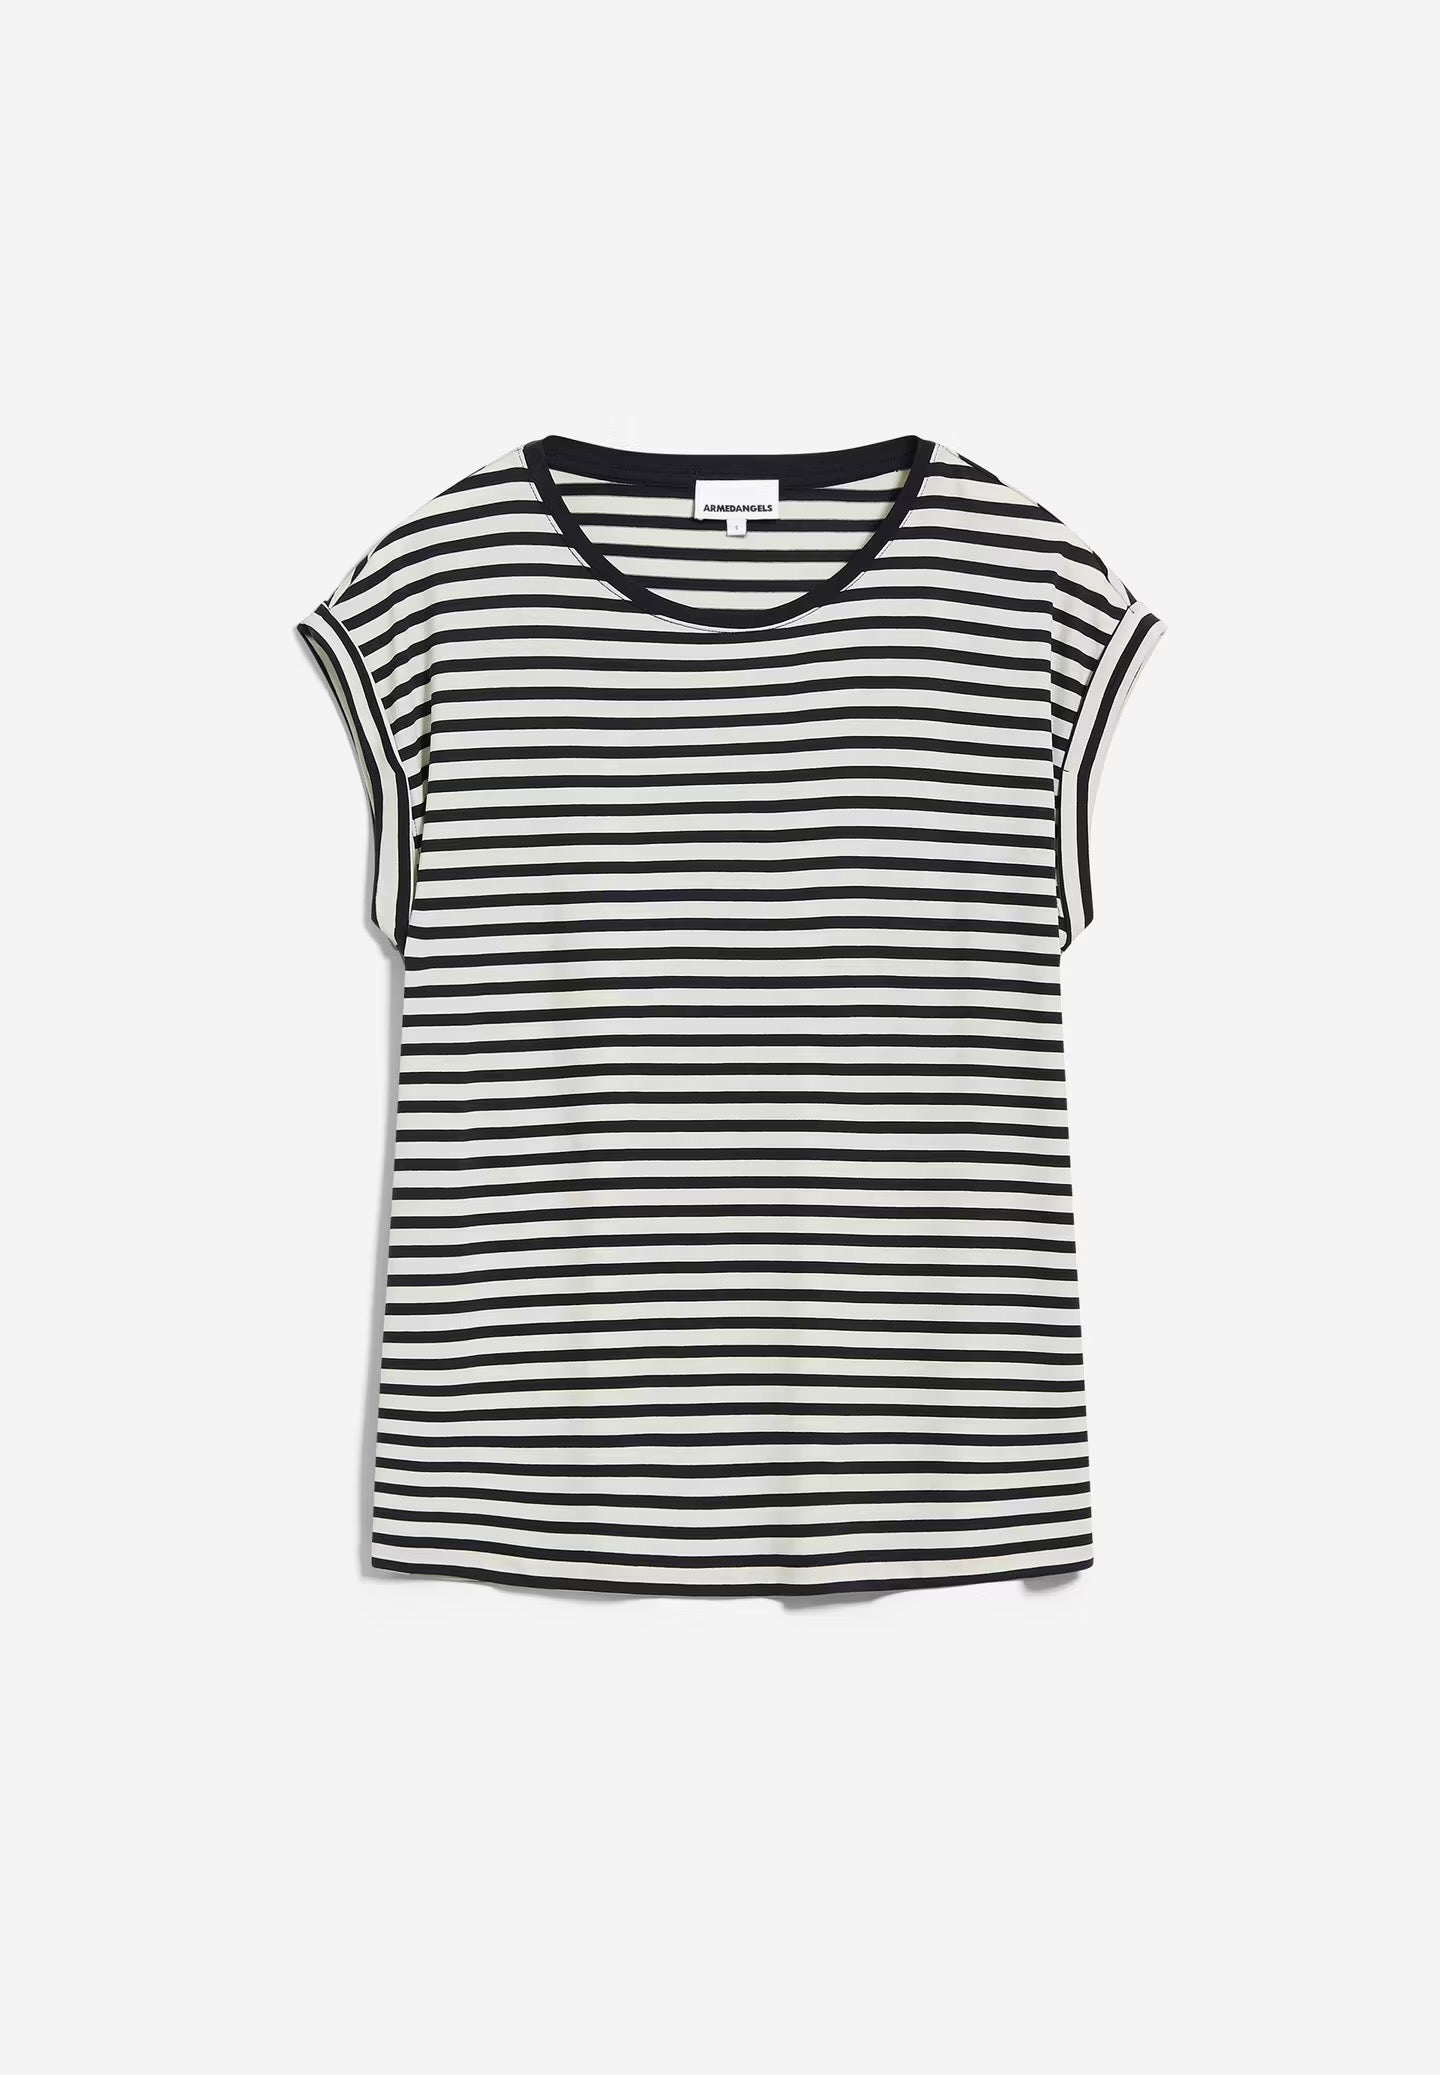 Relaxed fit cap sleeve striped t-shirt by ARMEDANGELS, made from a sustainable TENCEL™ and organic cotton mix. Fine horizontal stripes in navy blue and oat milk white.